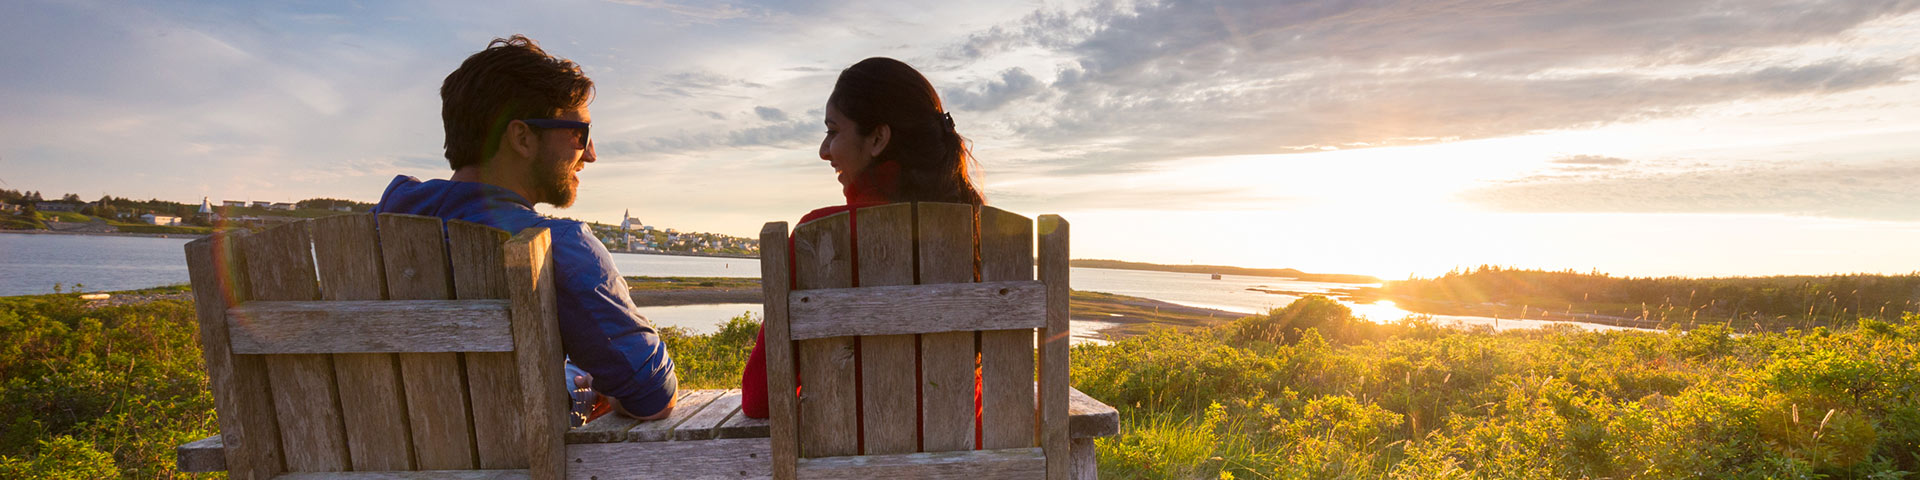 Two people sit in wooden chairs while the sunsets in front of them